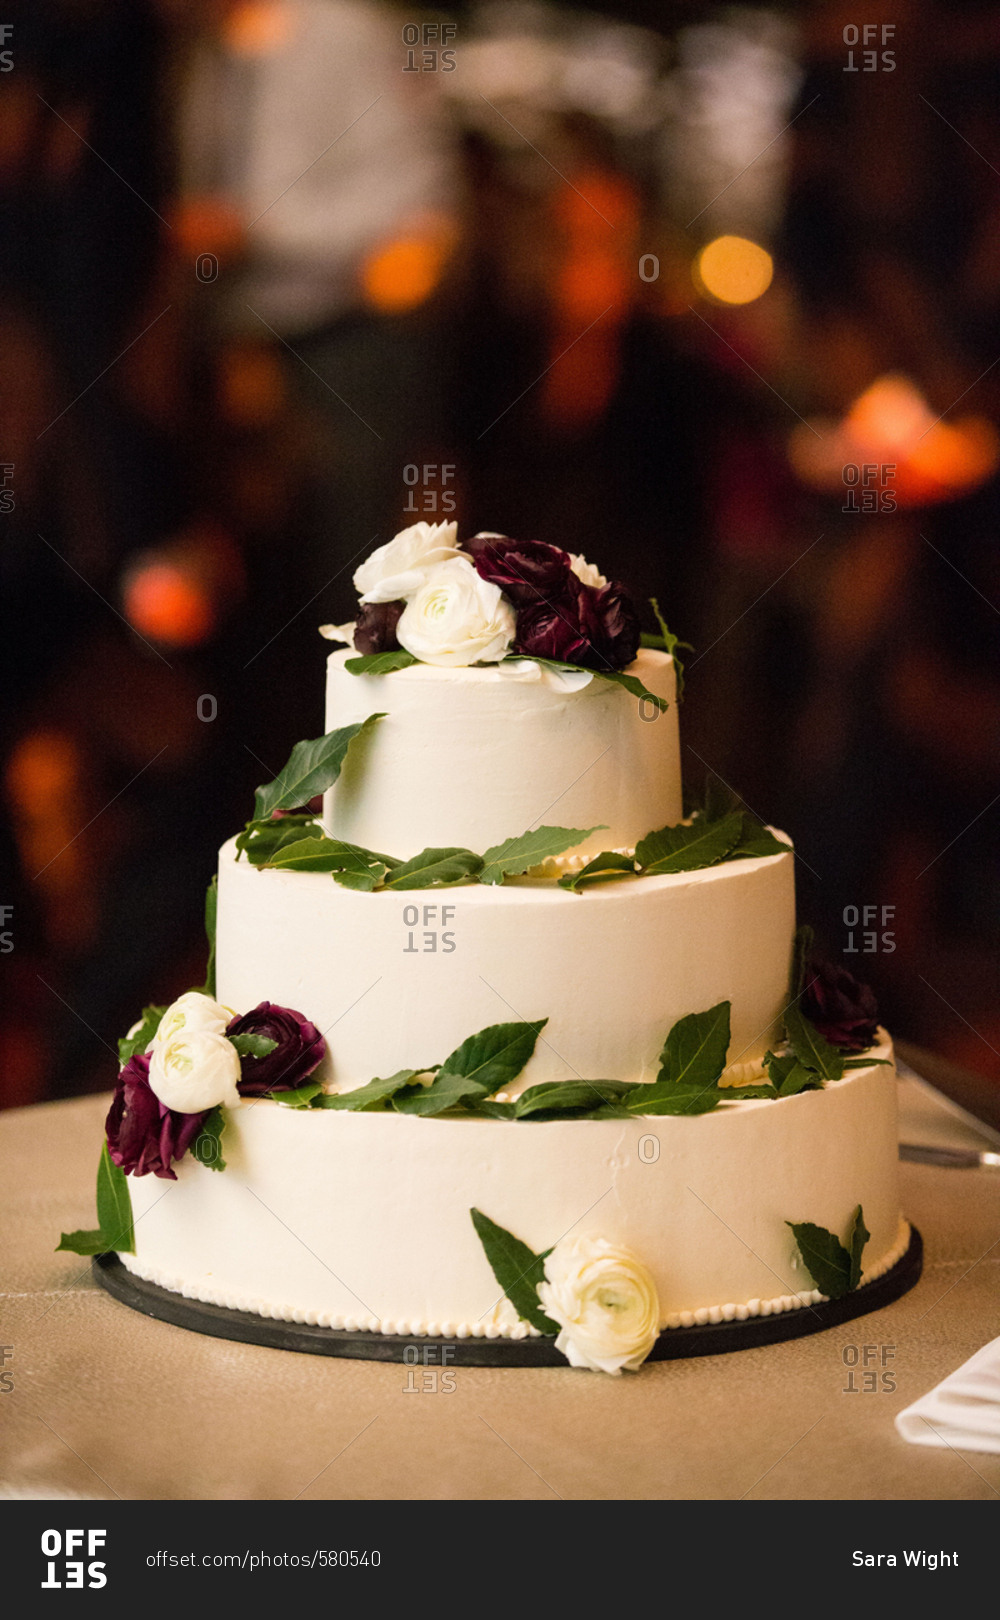 Wedding cake with roses at night